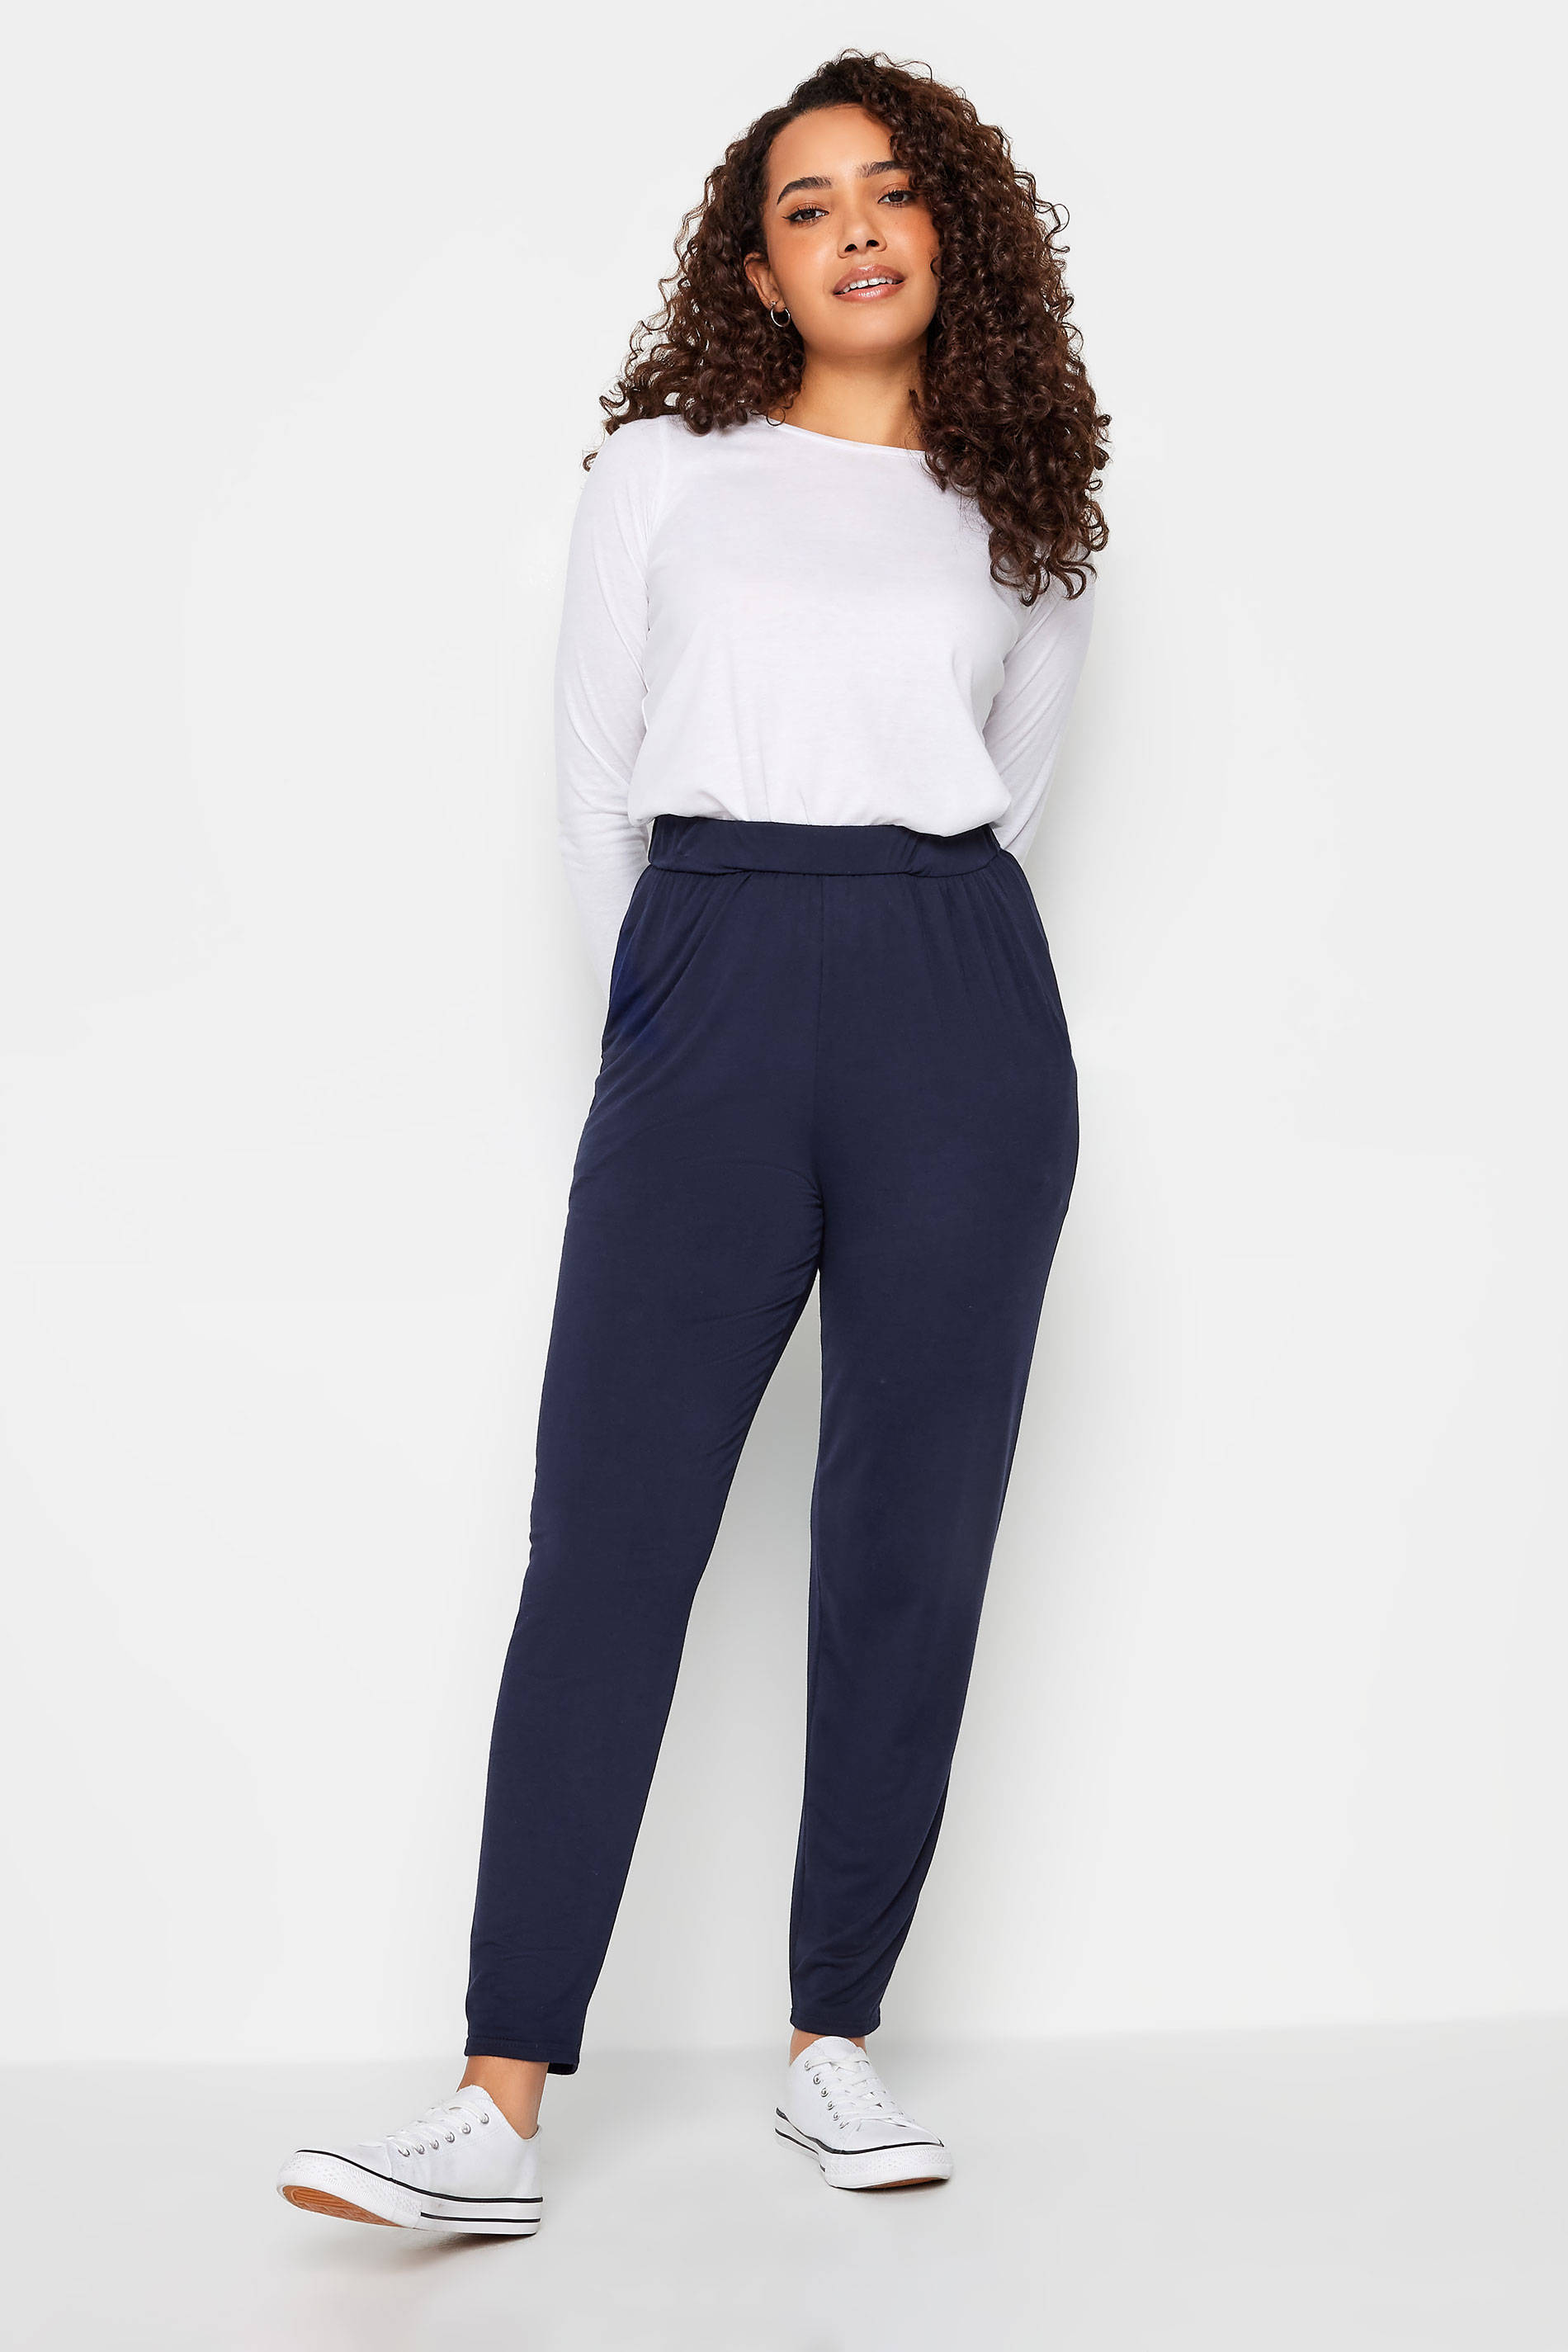 M&Co Navy Blue Hareem Jersey Trousers | M&Co 2